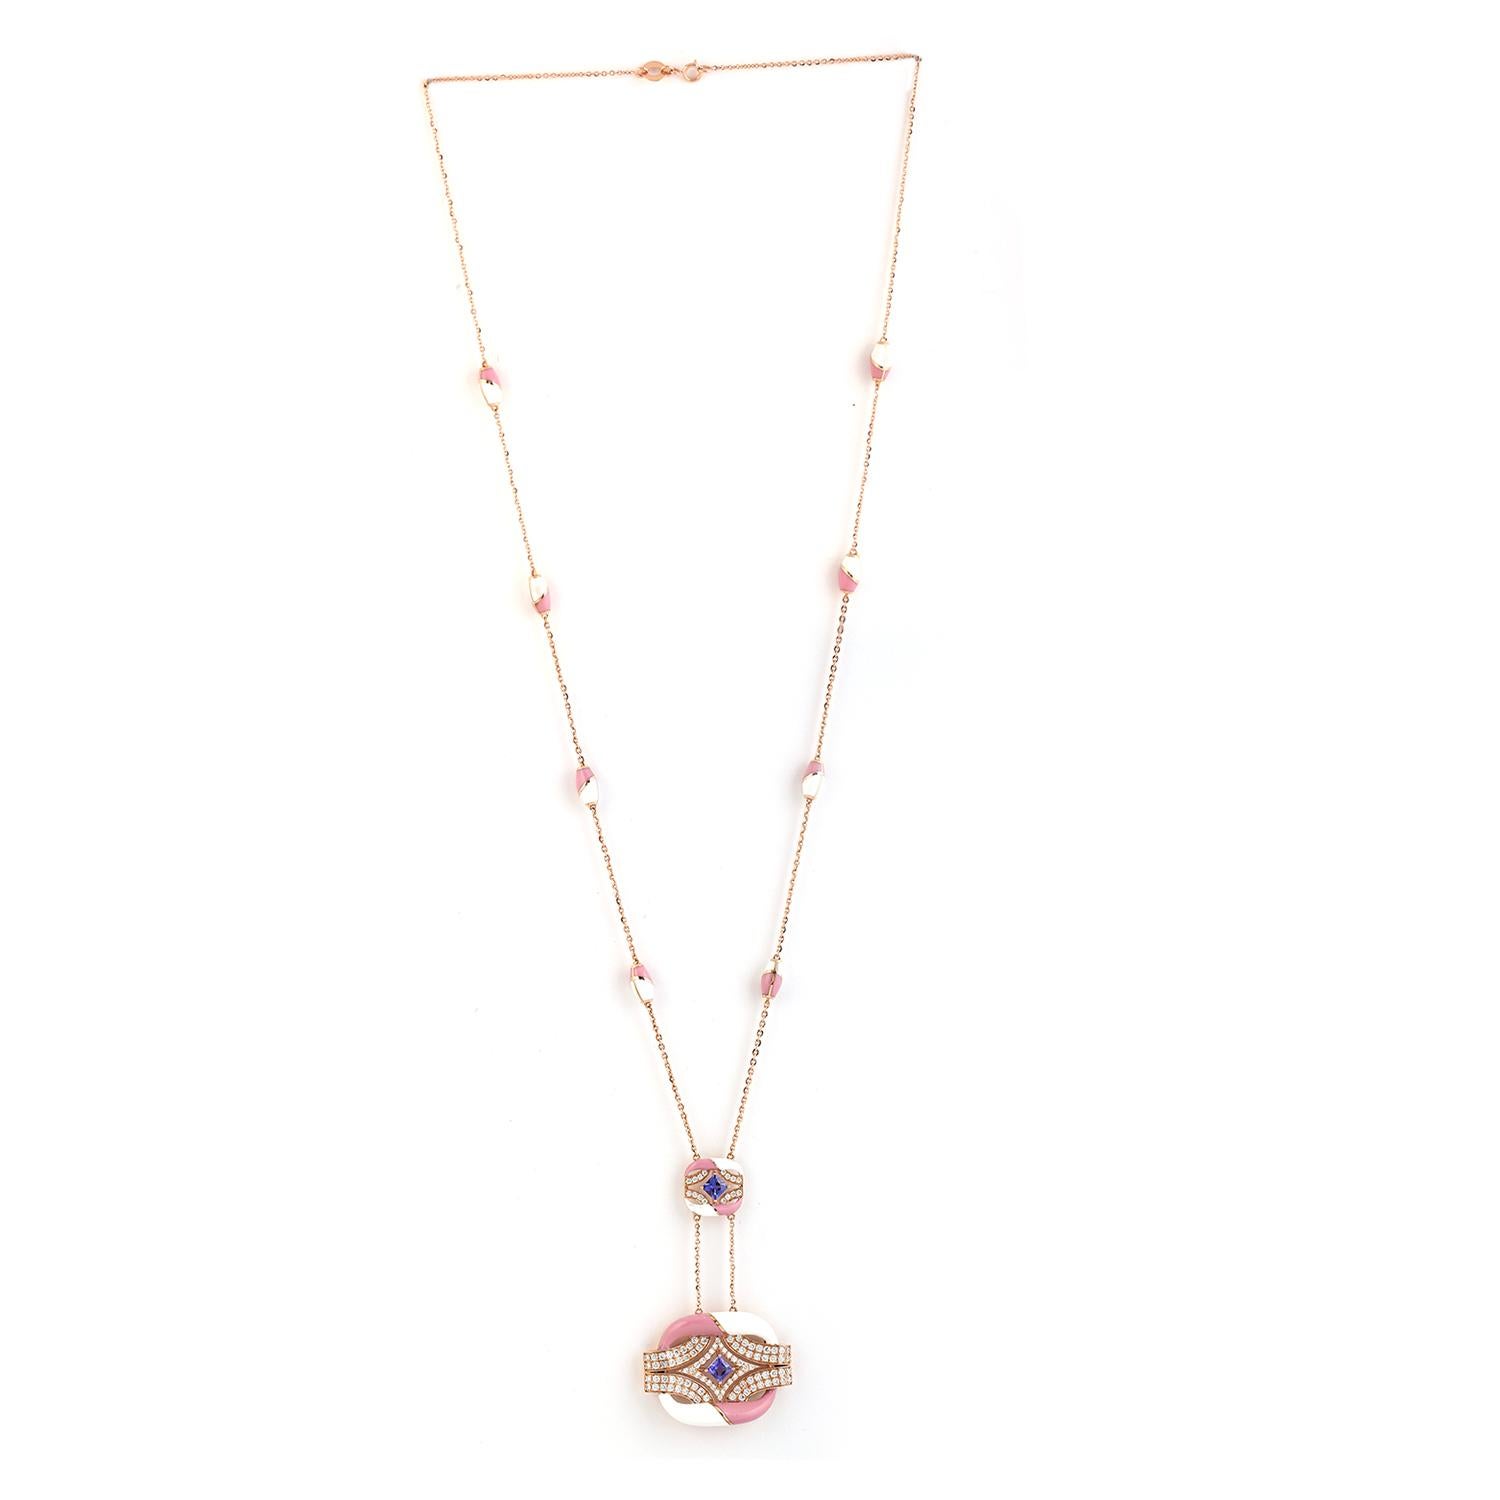 18k Rose Gold Necklace With Center Tanzanite and Pink & White Ceramic Stations In New Condition For Sale In New York, NY